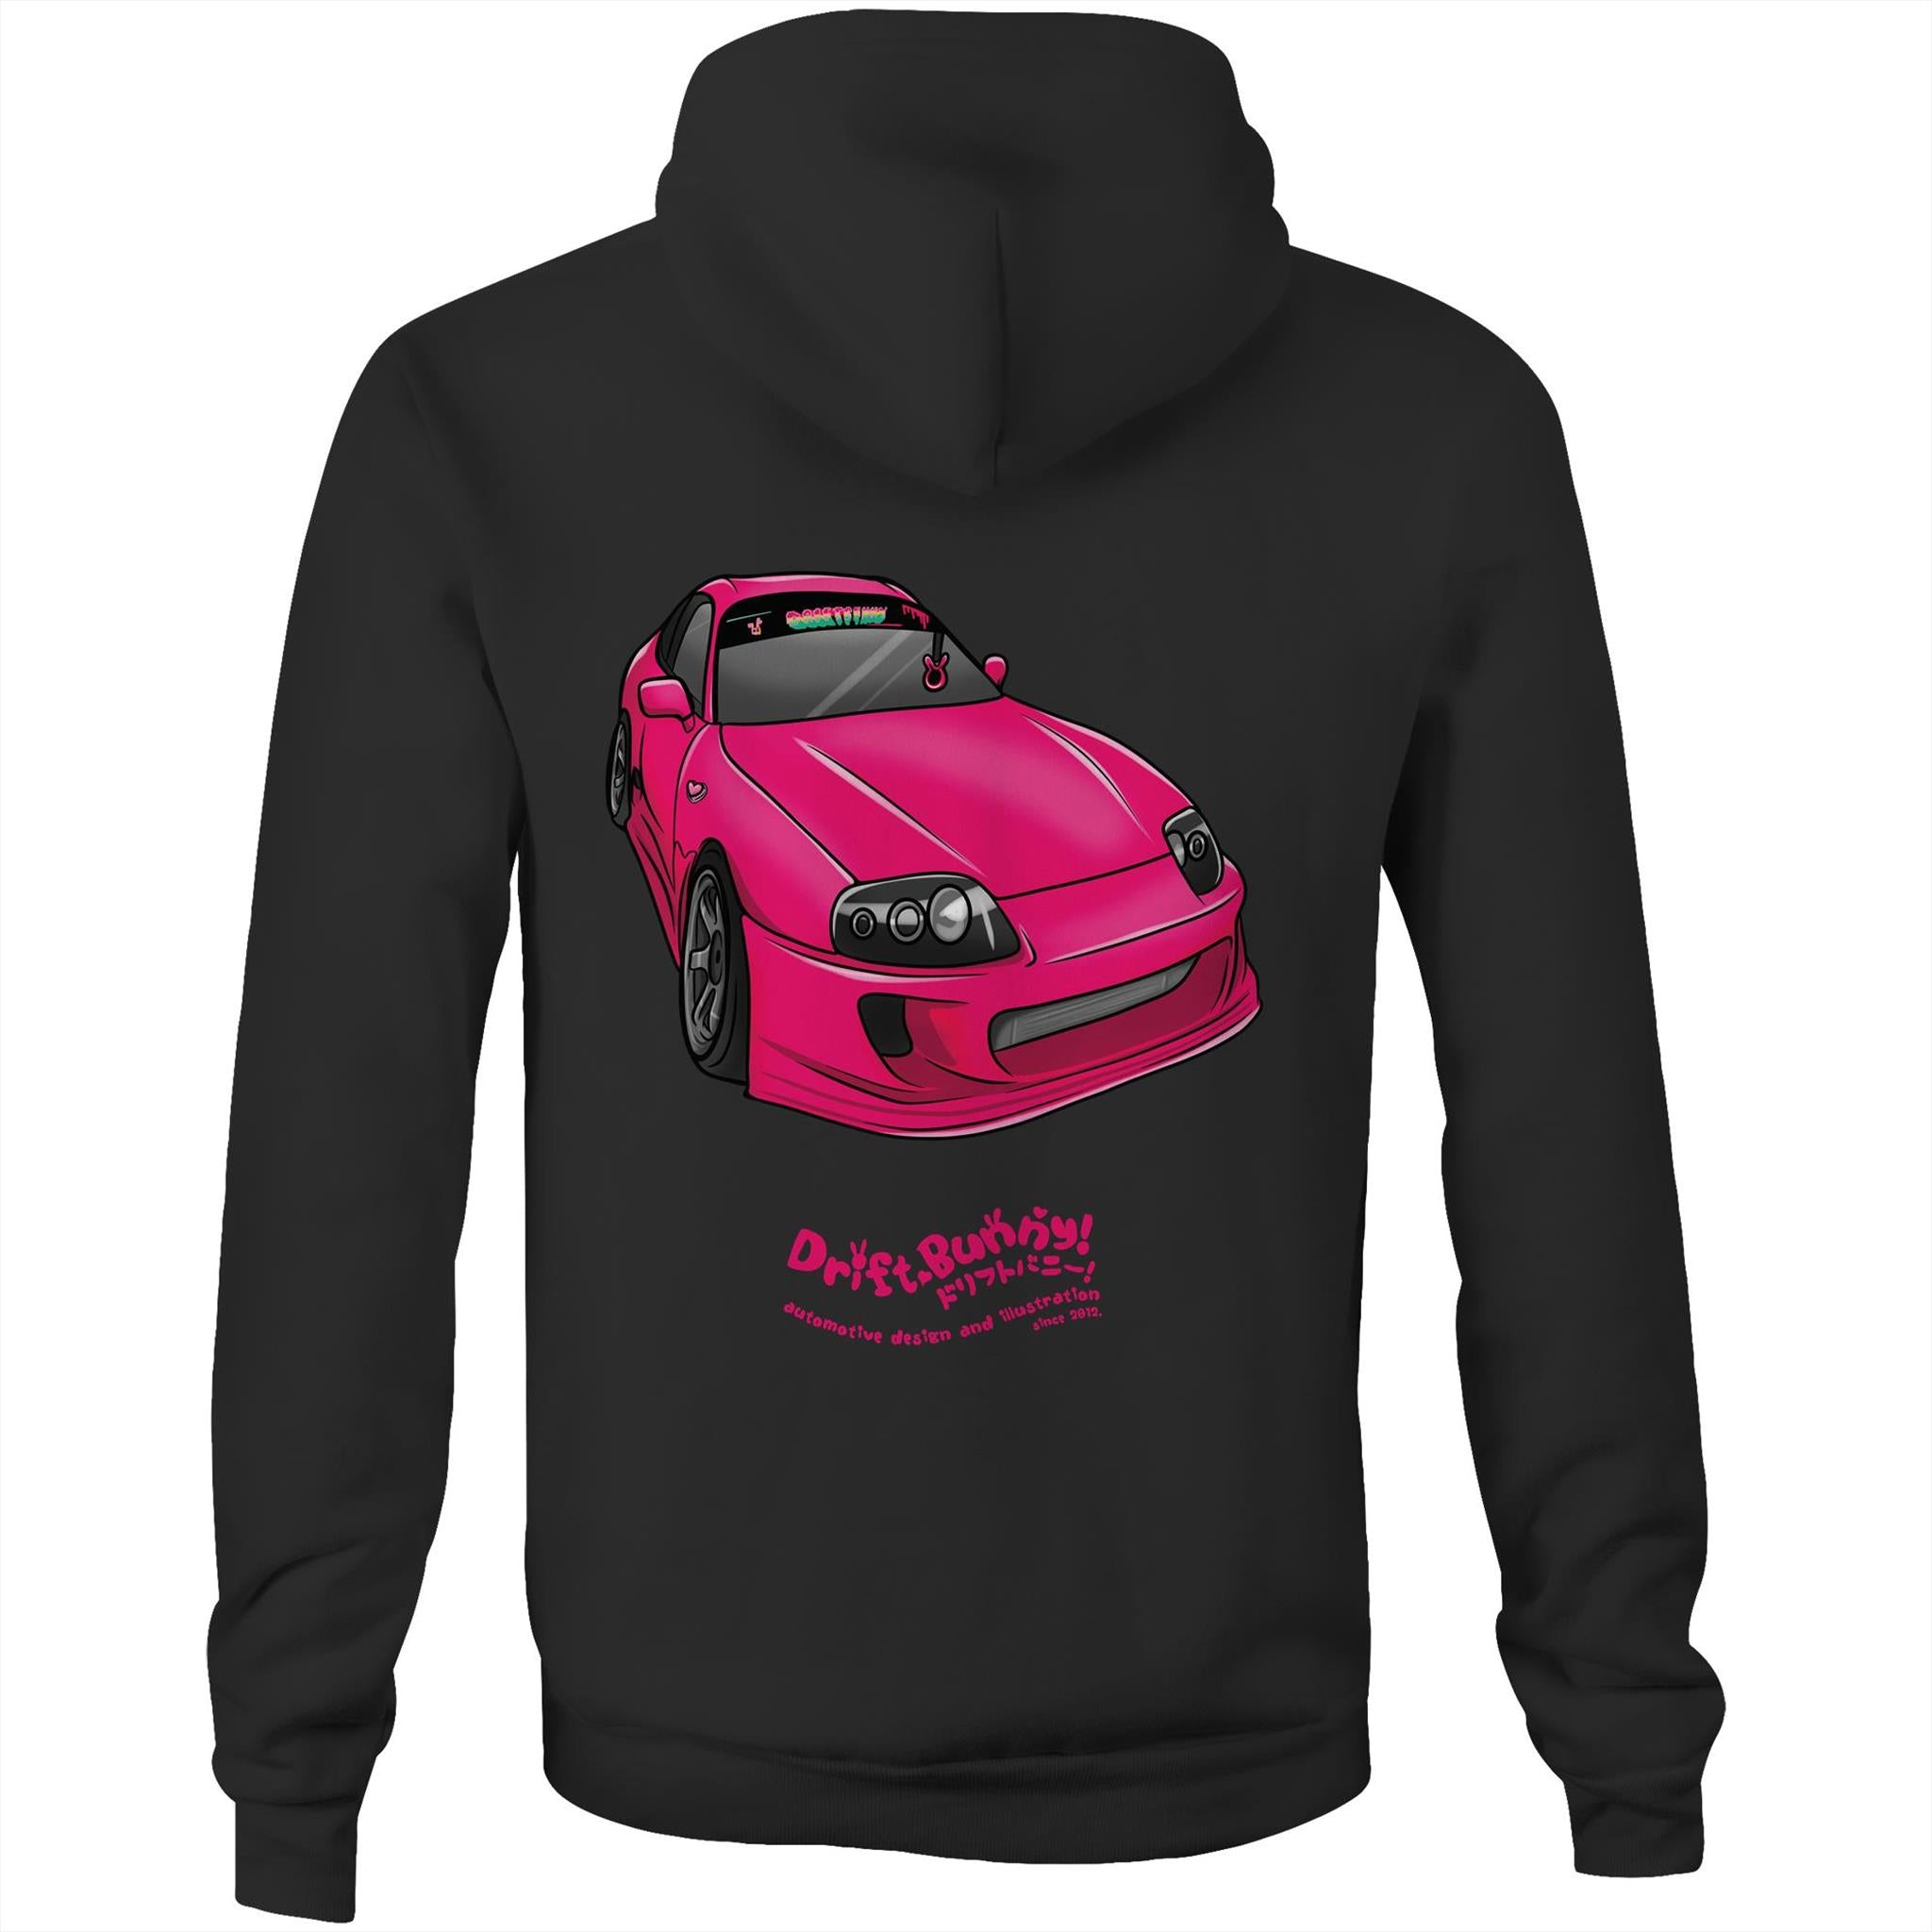 May's Pink Supra hoodie  Drift bunny decals